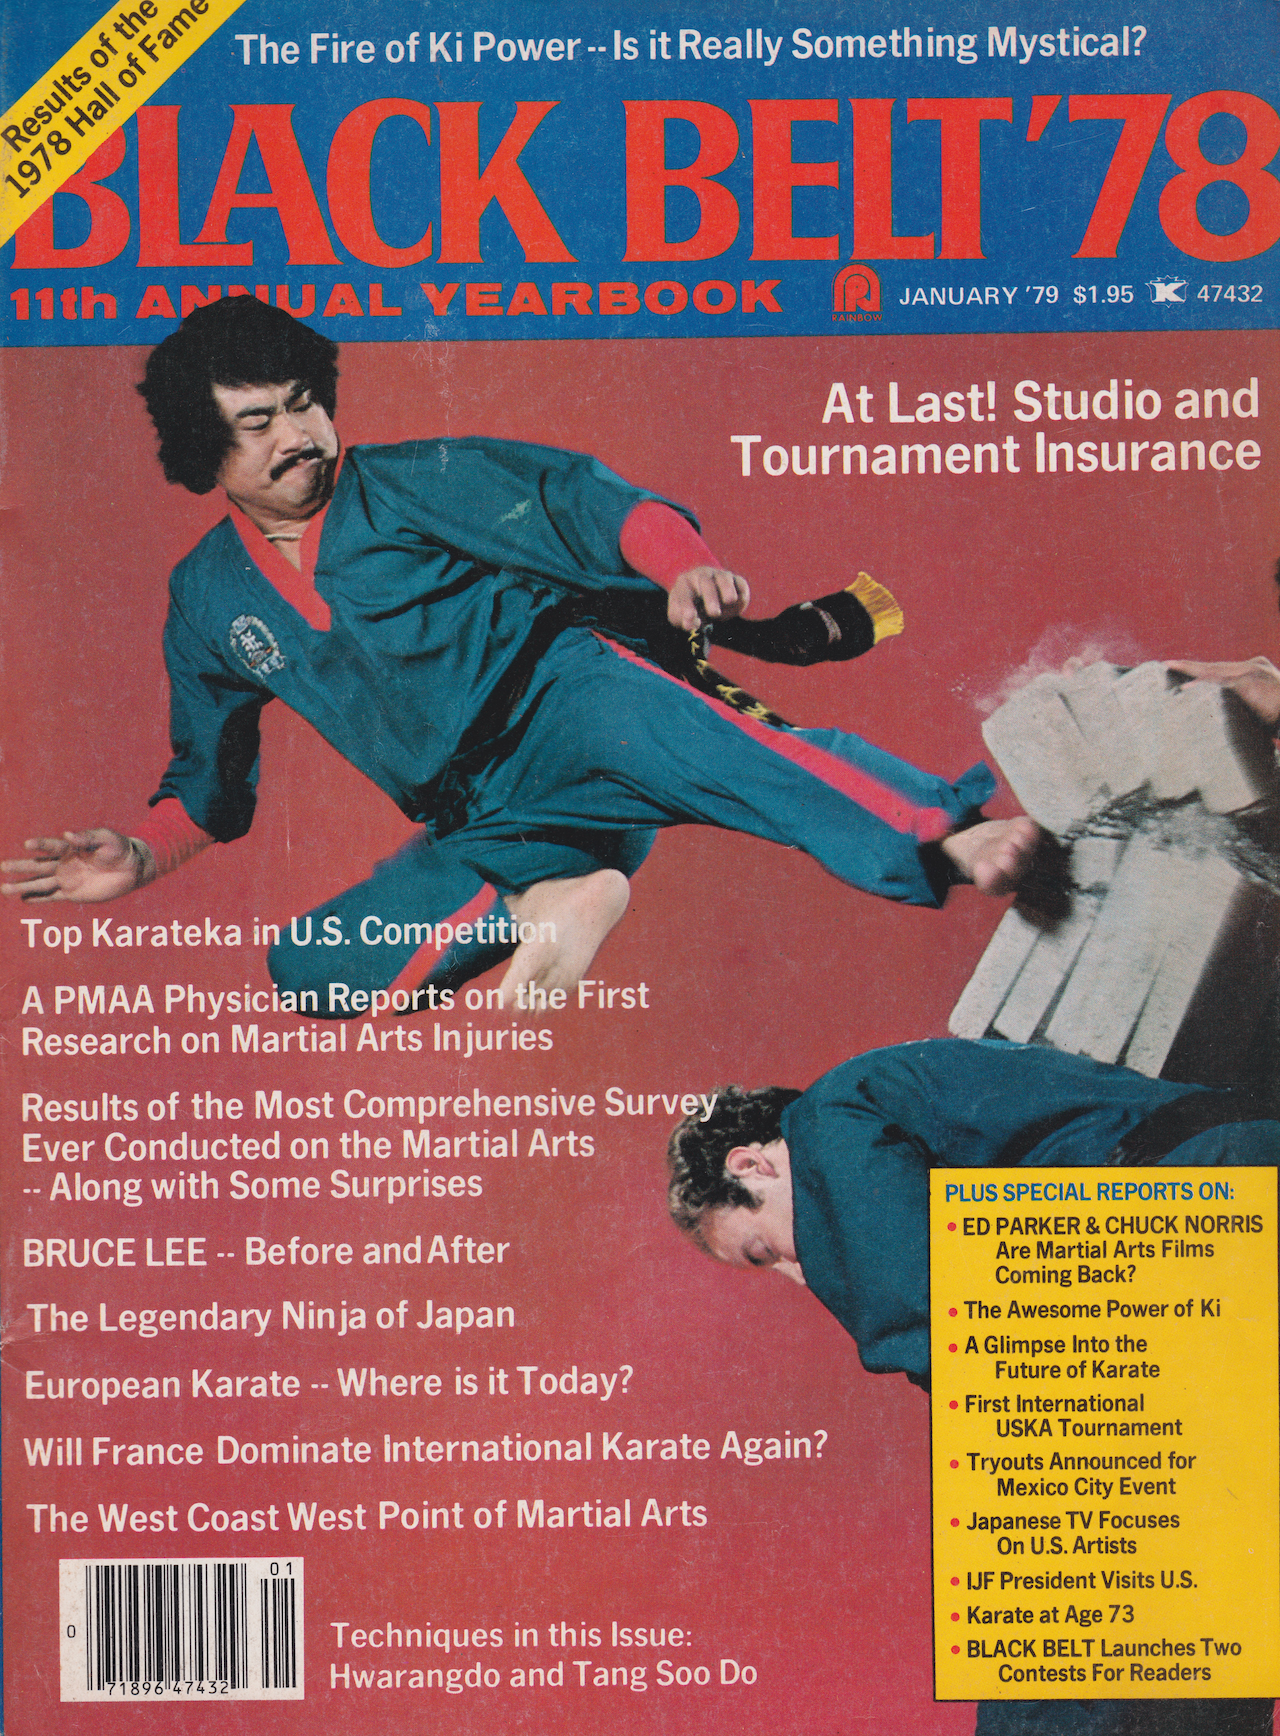 Black Belt Magazine Yearbook 1978 (Preowned) - Budovideos Inc